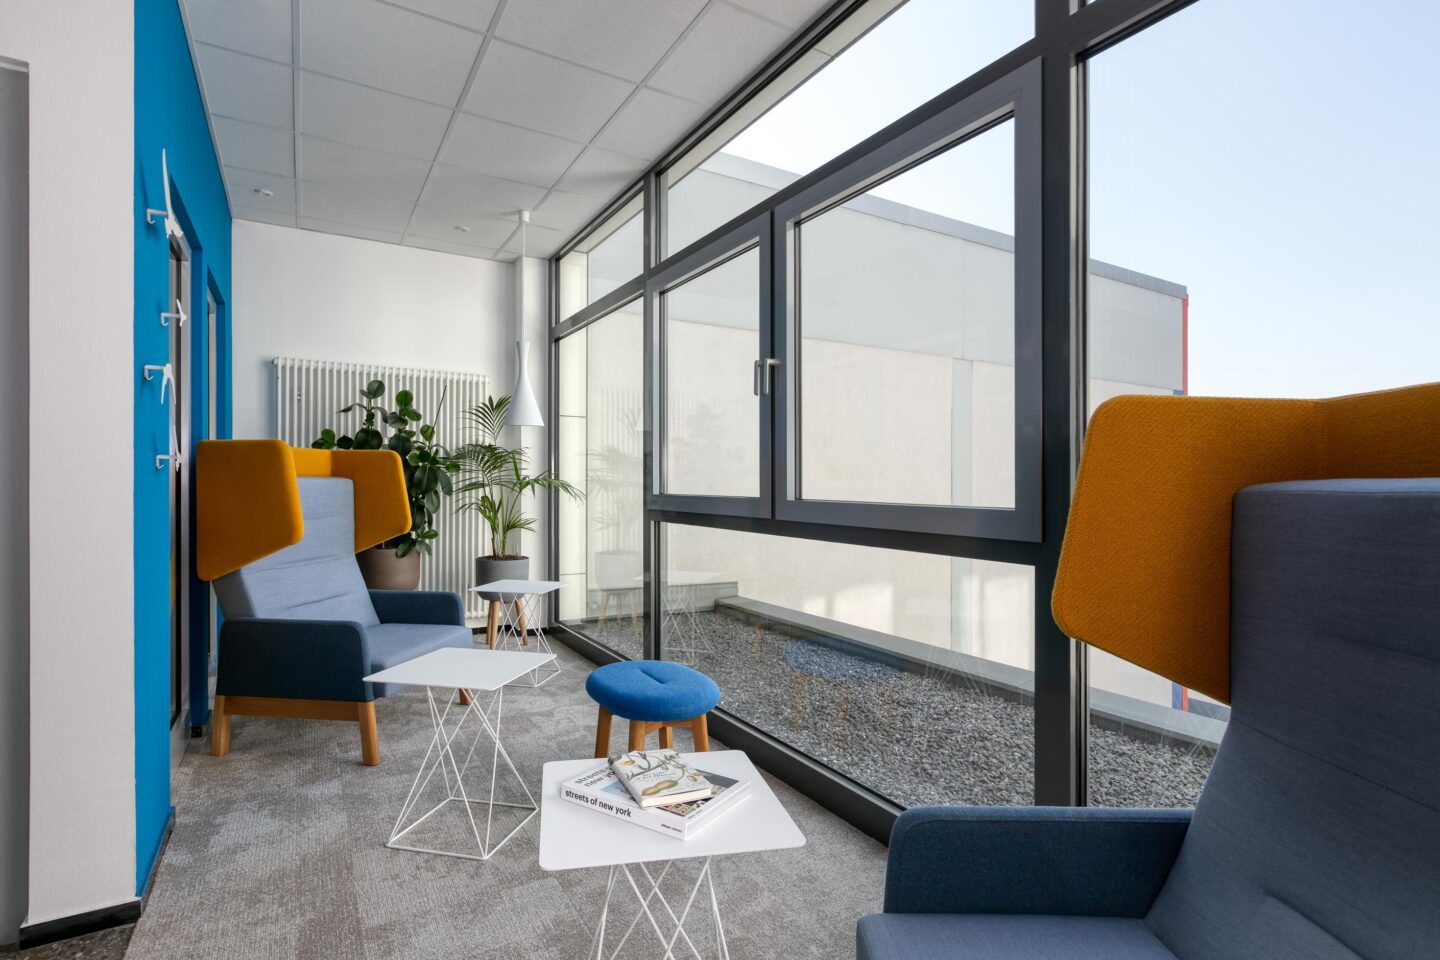 Tacton Systems │ modern office furnishings with feco │ lounge area